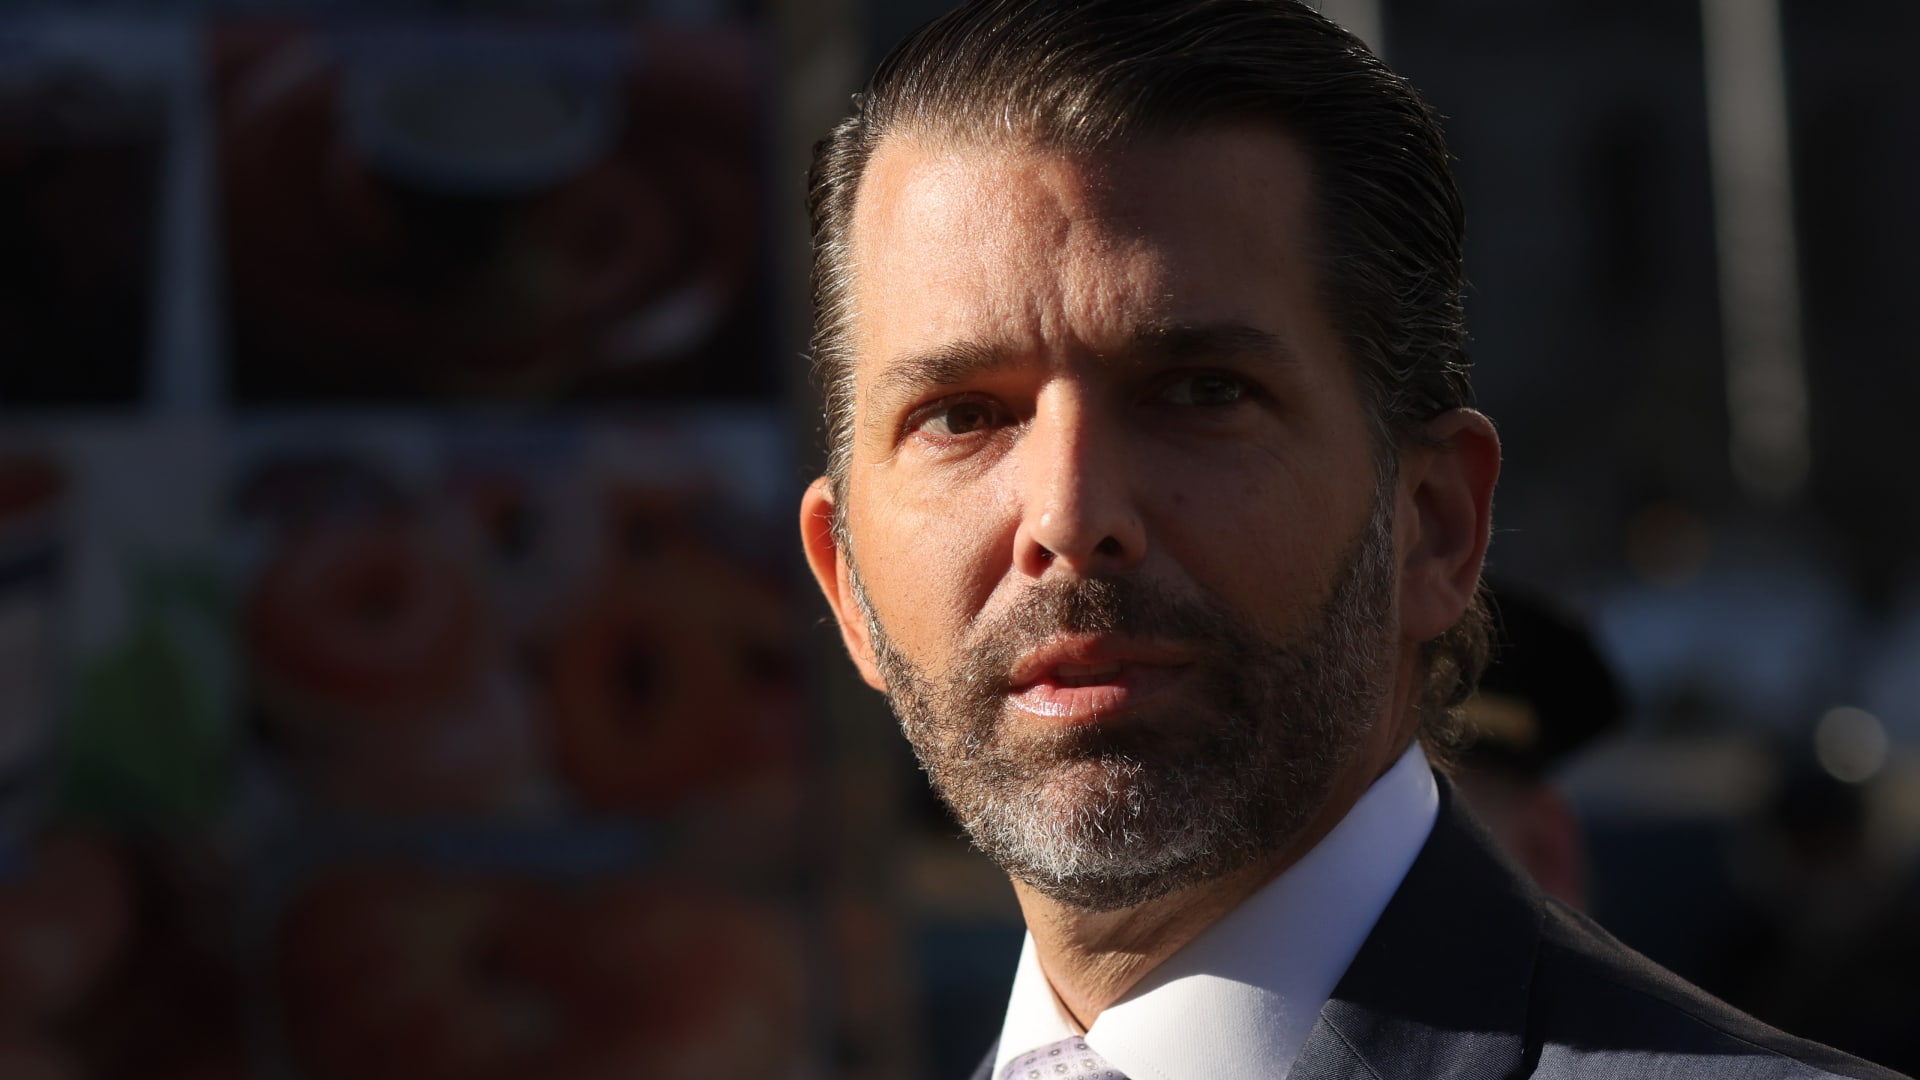 Donald Trump Jr. returns to witness stand as defense lays out its case in 0 million business fraud trial